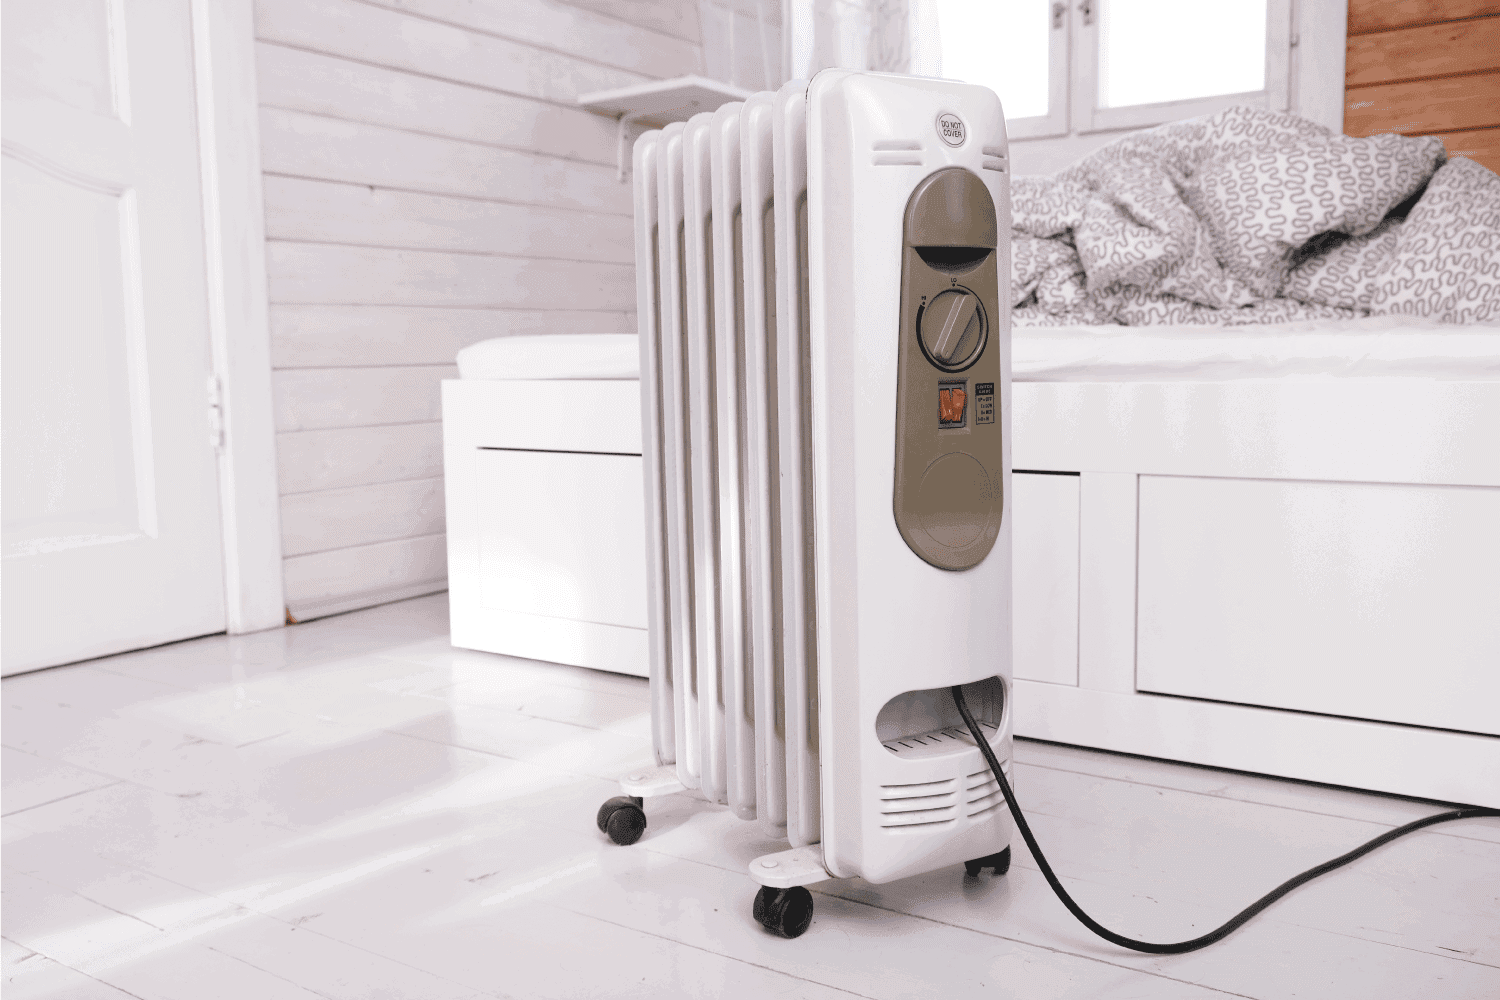 Oil-filled electrical mobile radiator heater for home heating and comfort control in the room in a wooden country house.